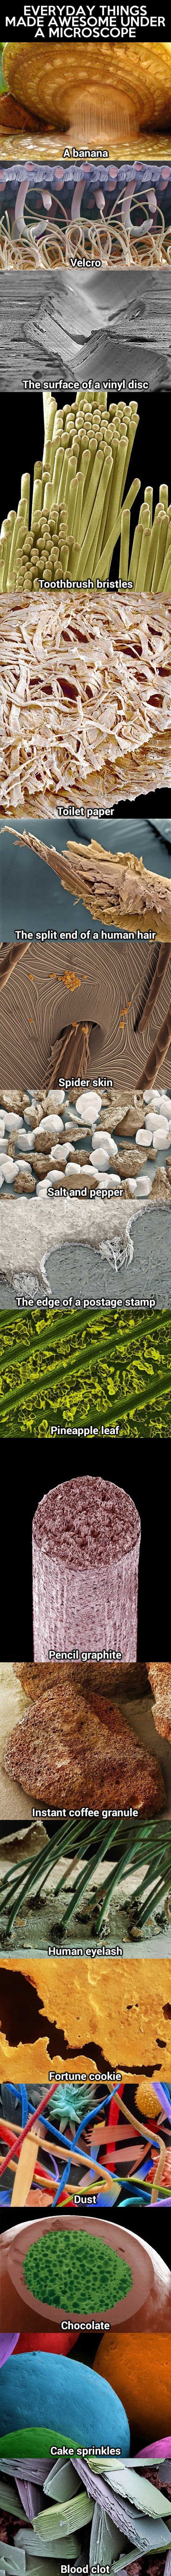 under a microscope funny picture